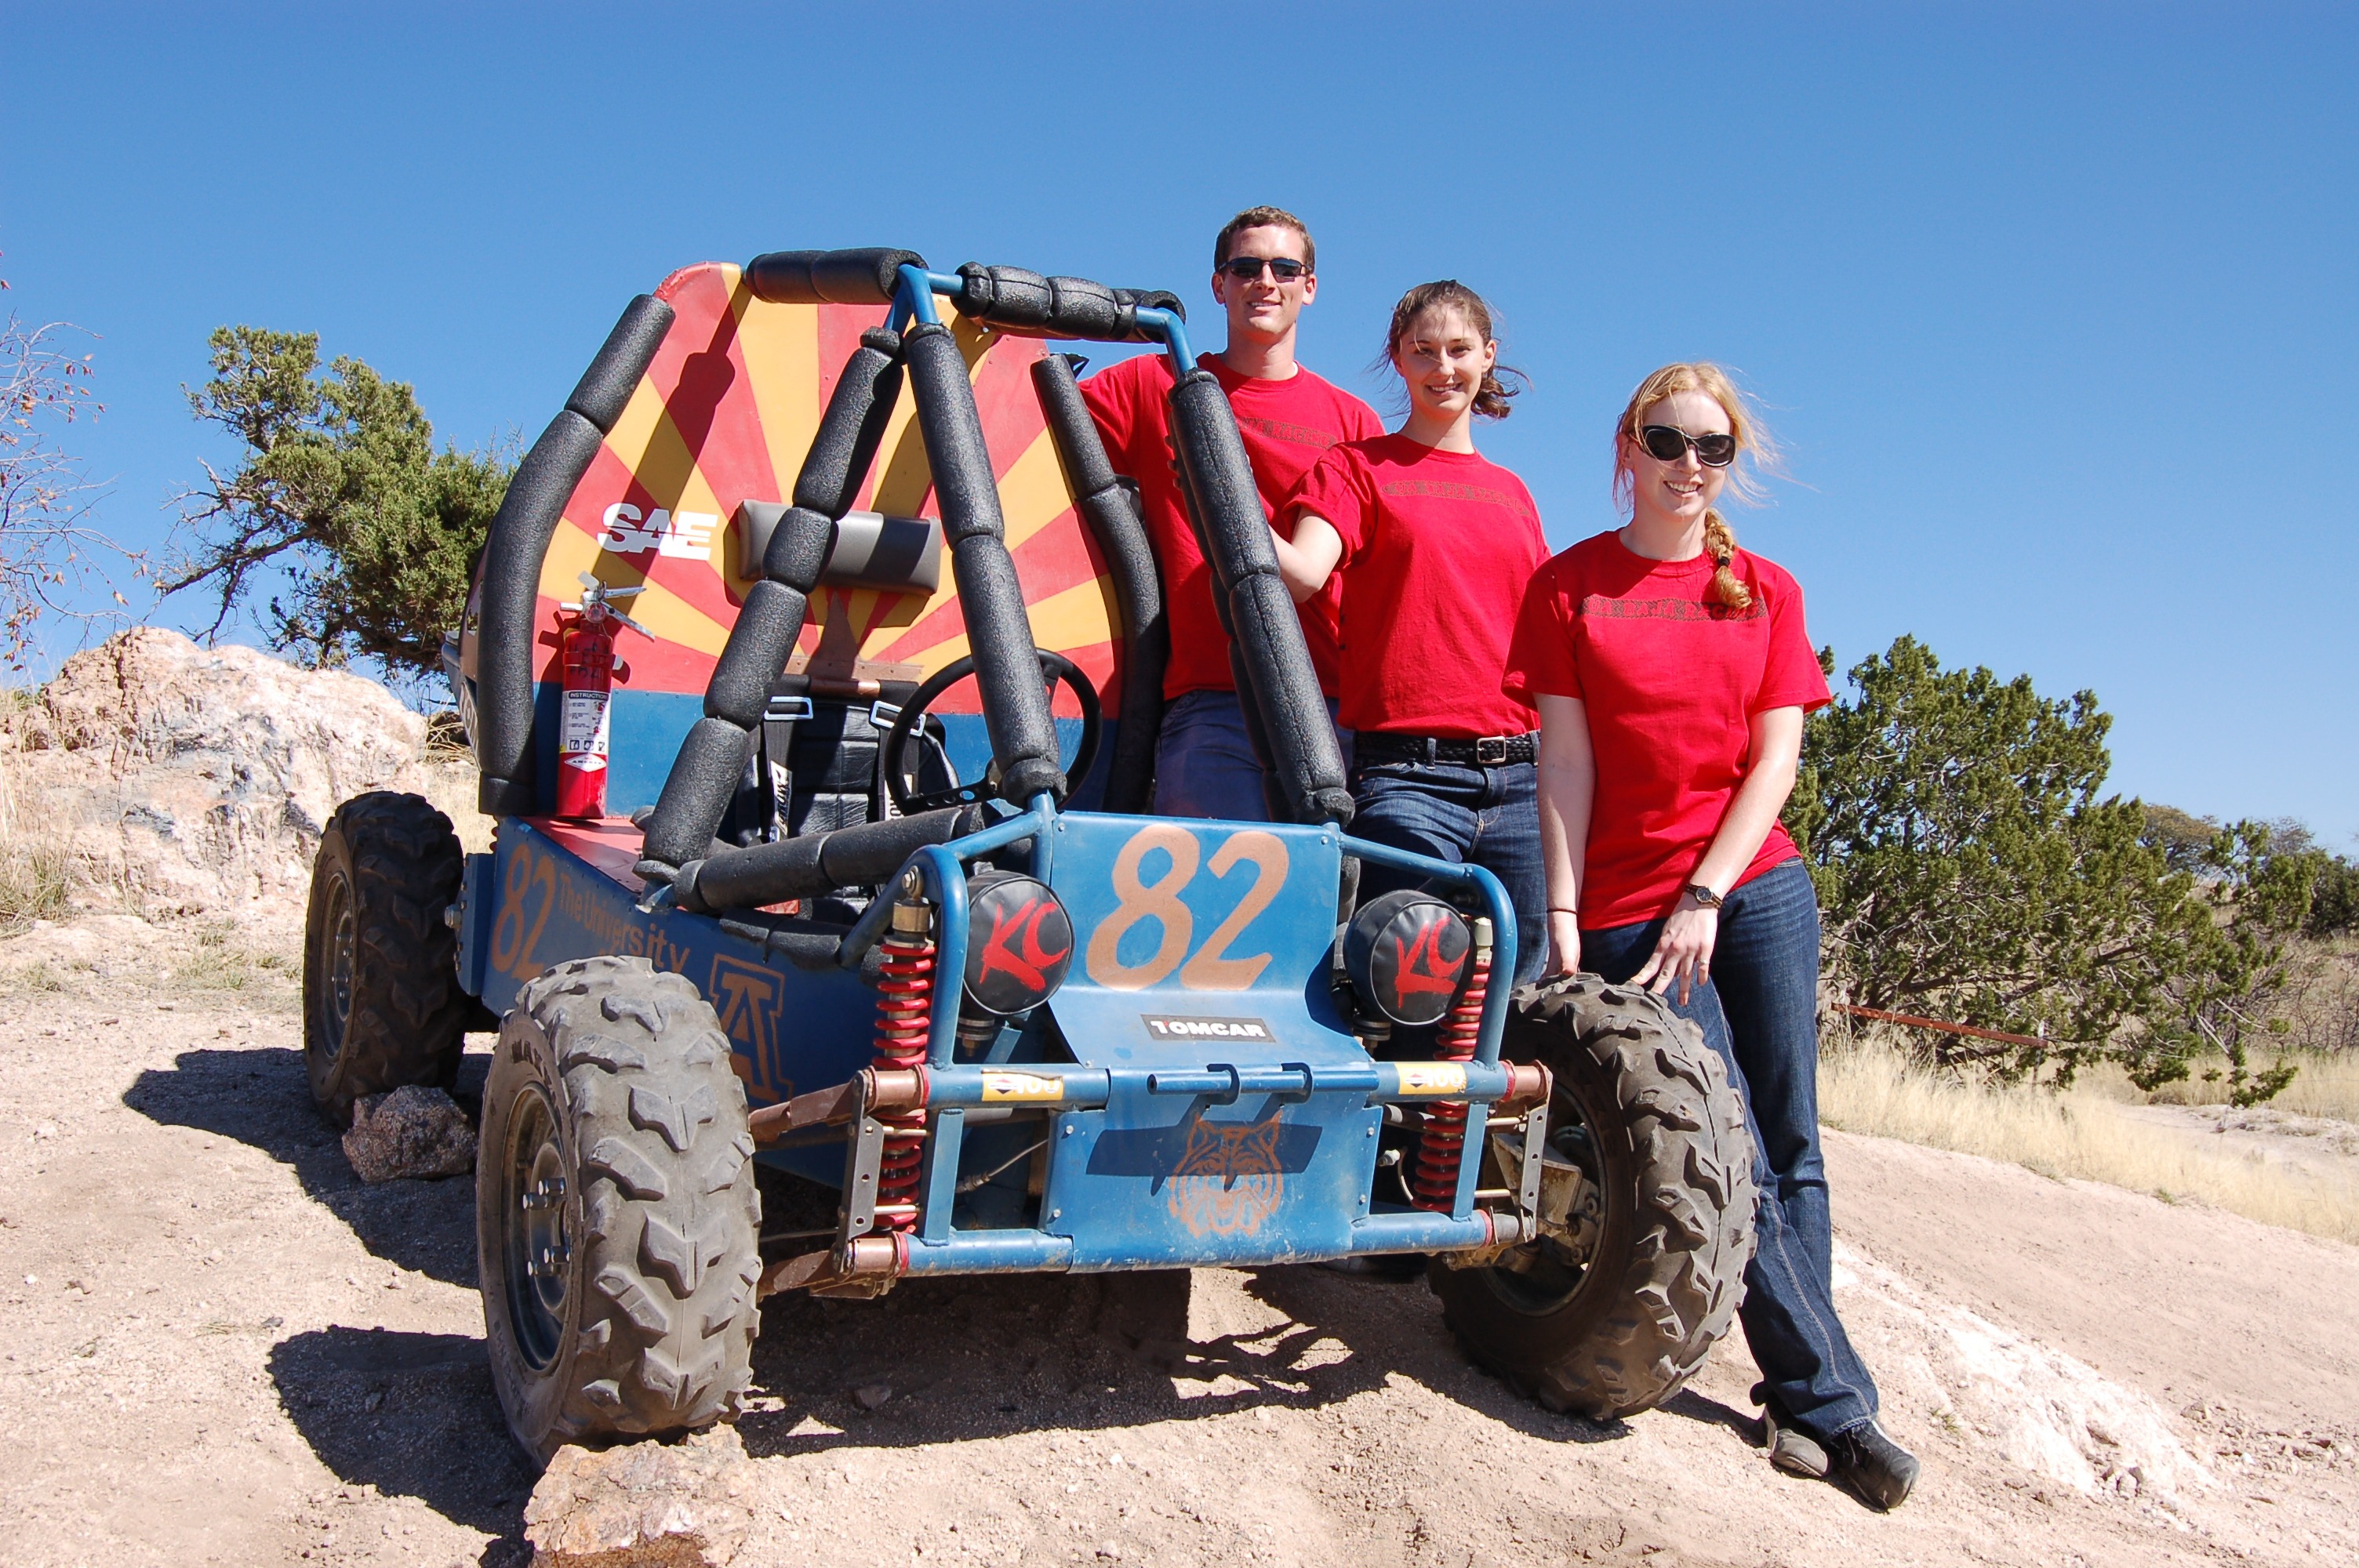 Engineering students with the baja racer they built